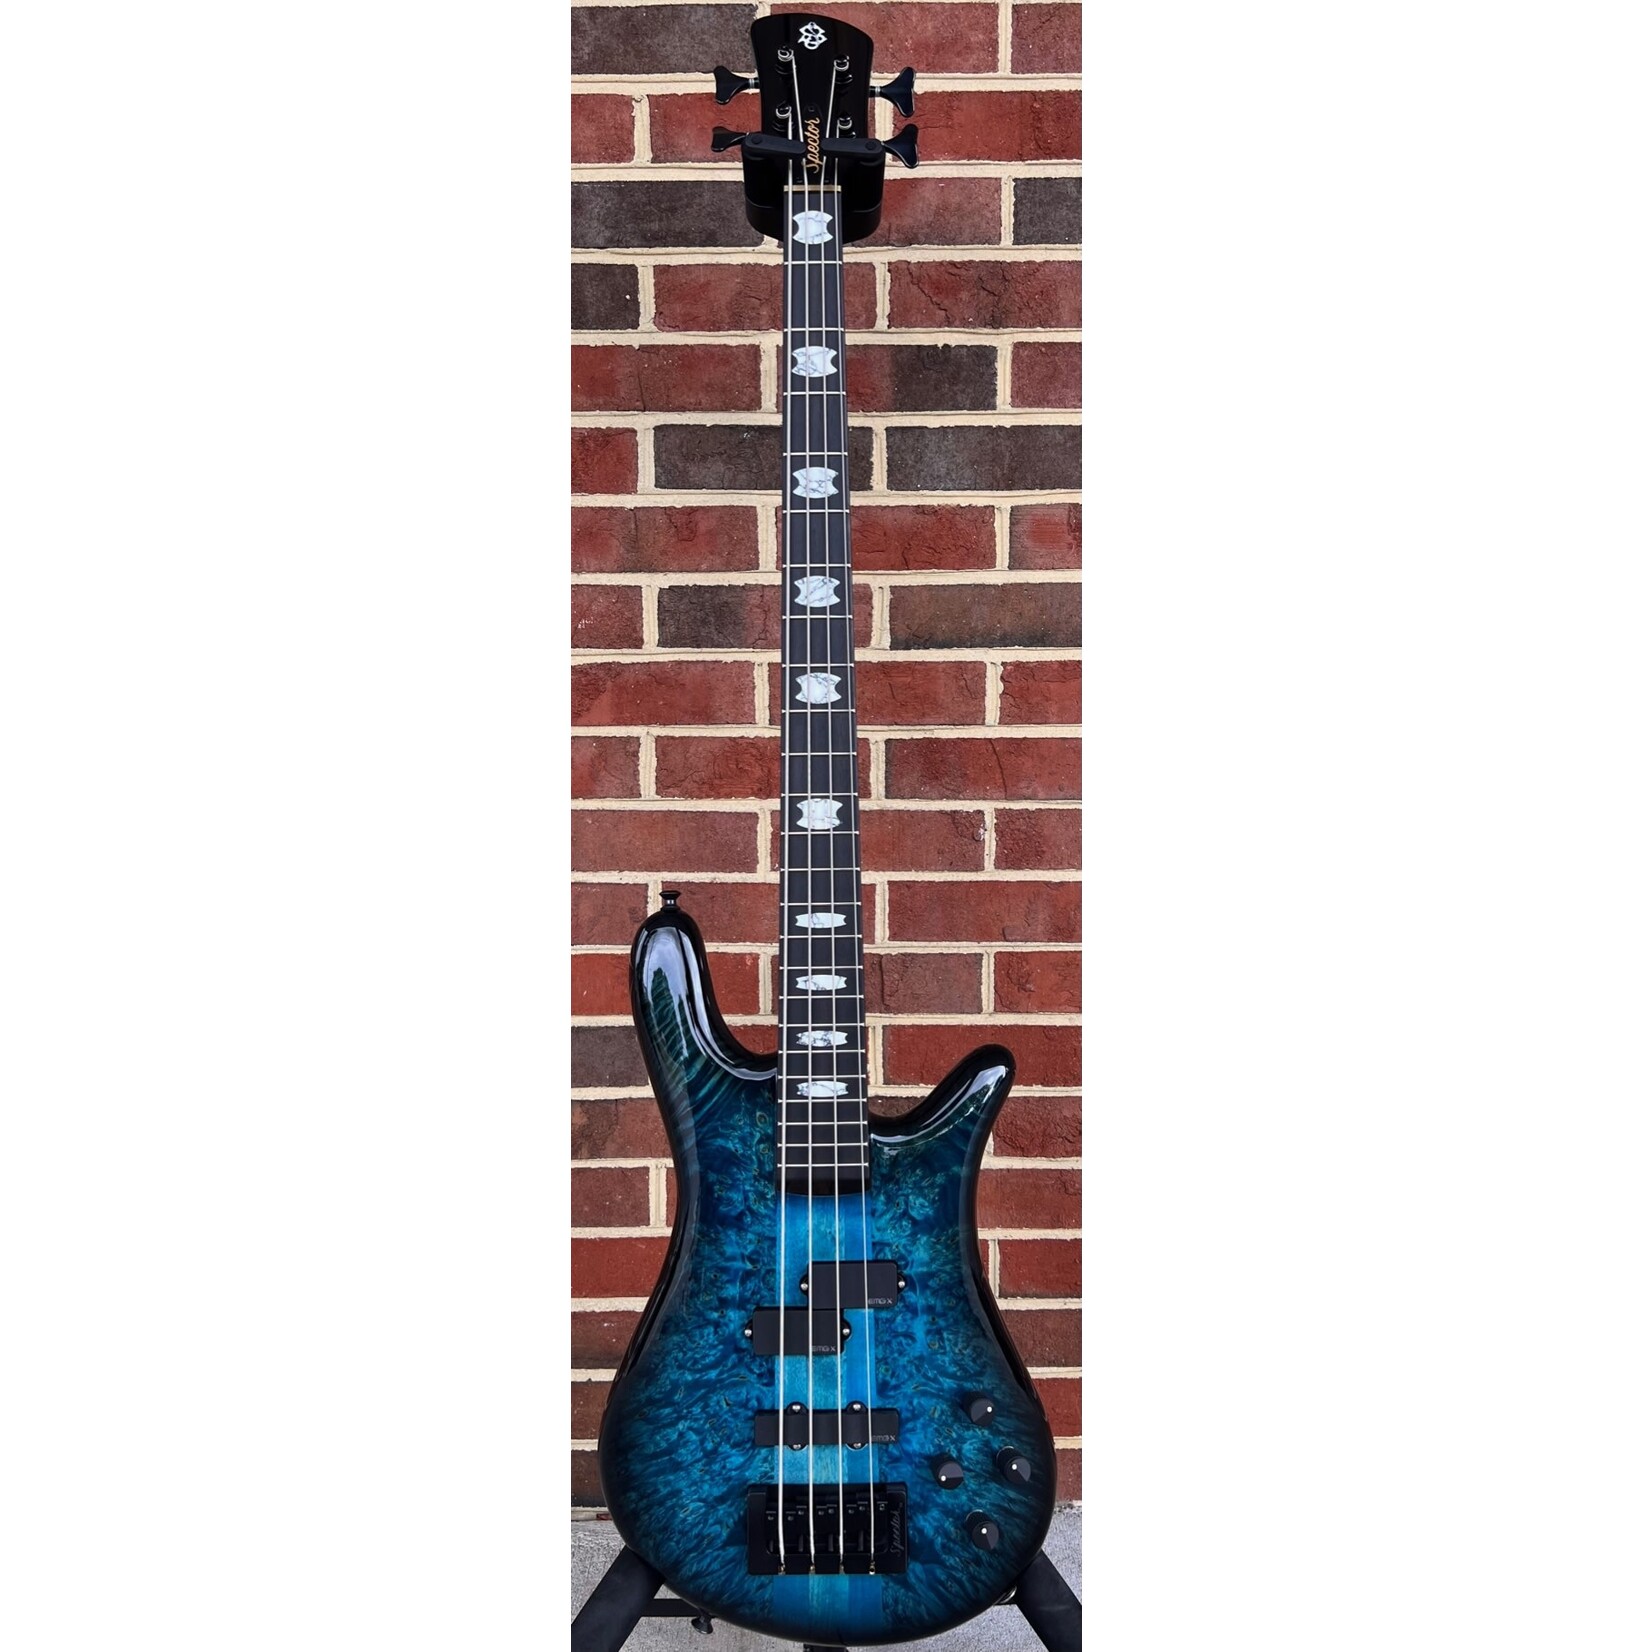 Spector Spector USA NS-2, Inferno Blue, Maple Burl Top, Reclaimed Redwood Body, Ebony Fretboard, White Constituted Stone Crown Inlays, EMG PX/SJX Set, HAZ 9-volt Preamp, Hardshell Case (USED)